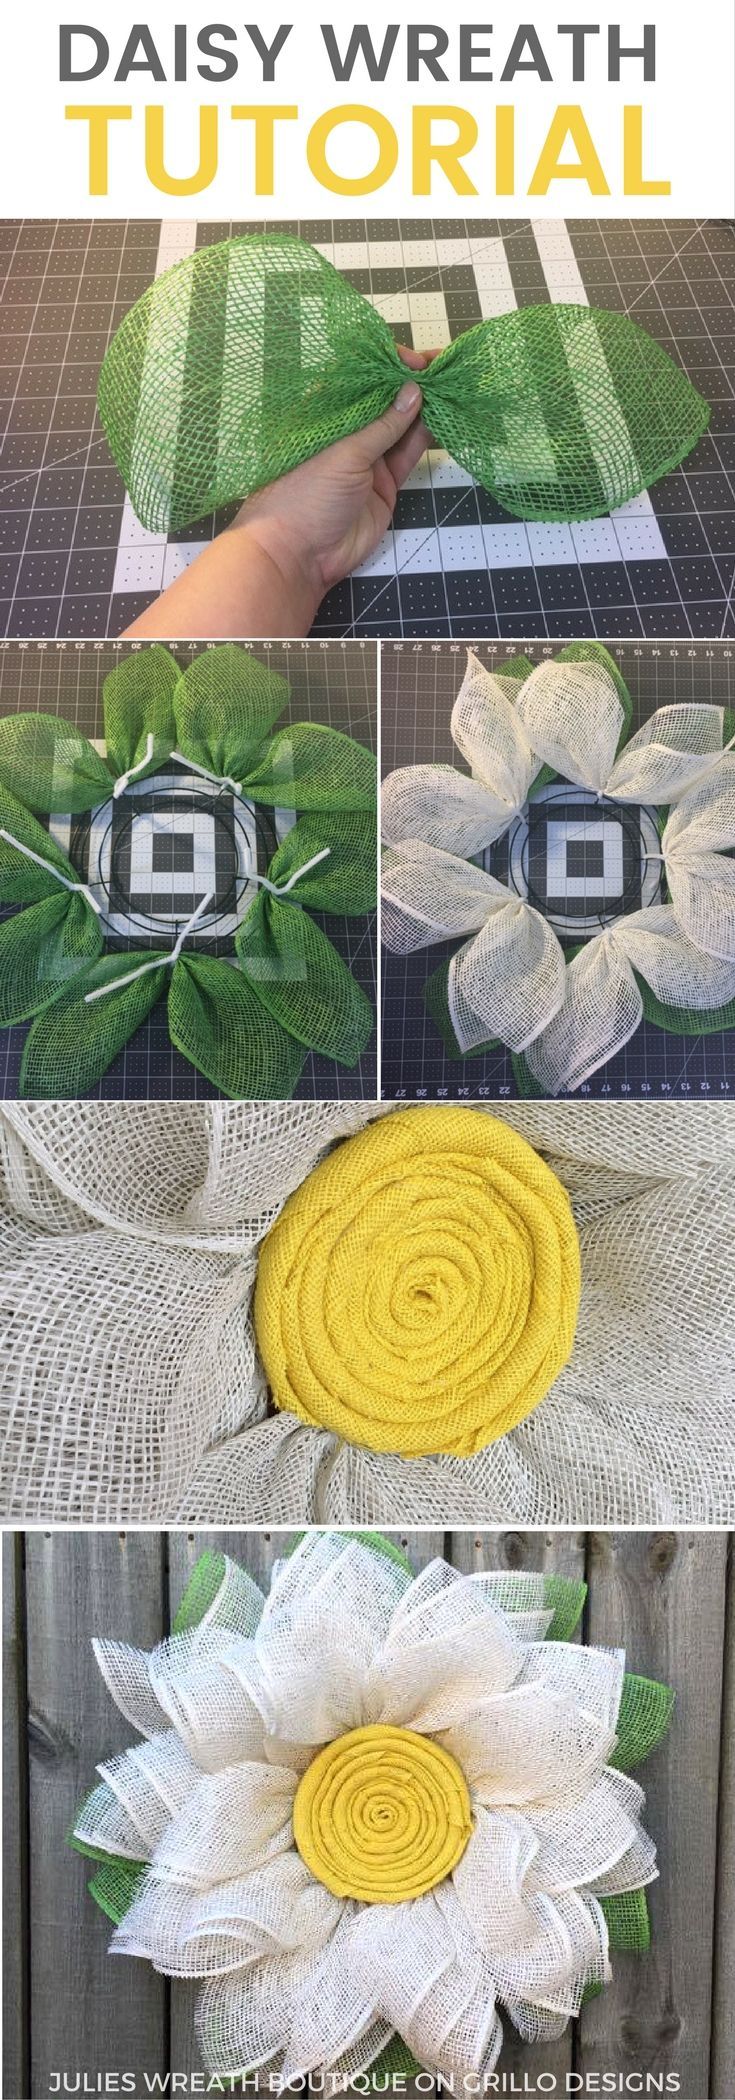 Burlap Daisy Wreath Tutorial – Learn how to make this one of a kind daisy wreath for your front door this spring! Click here for